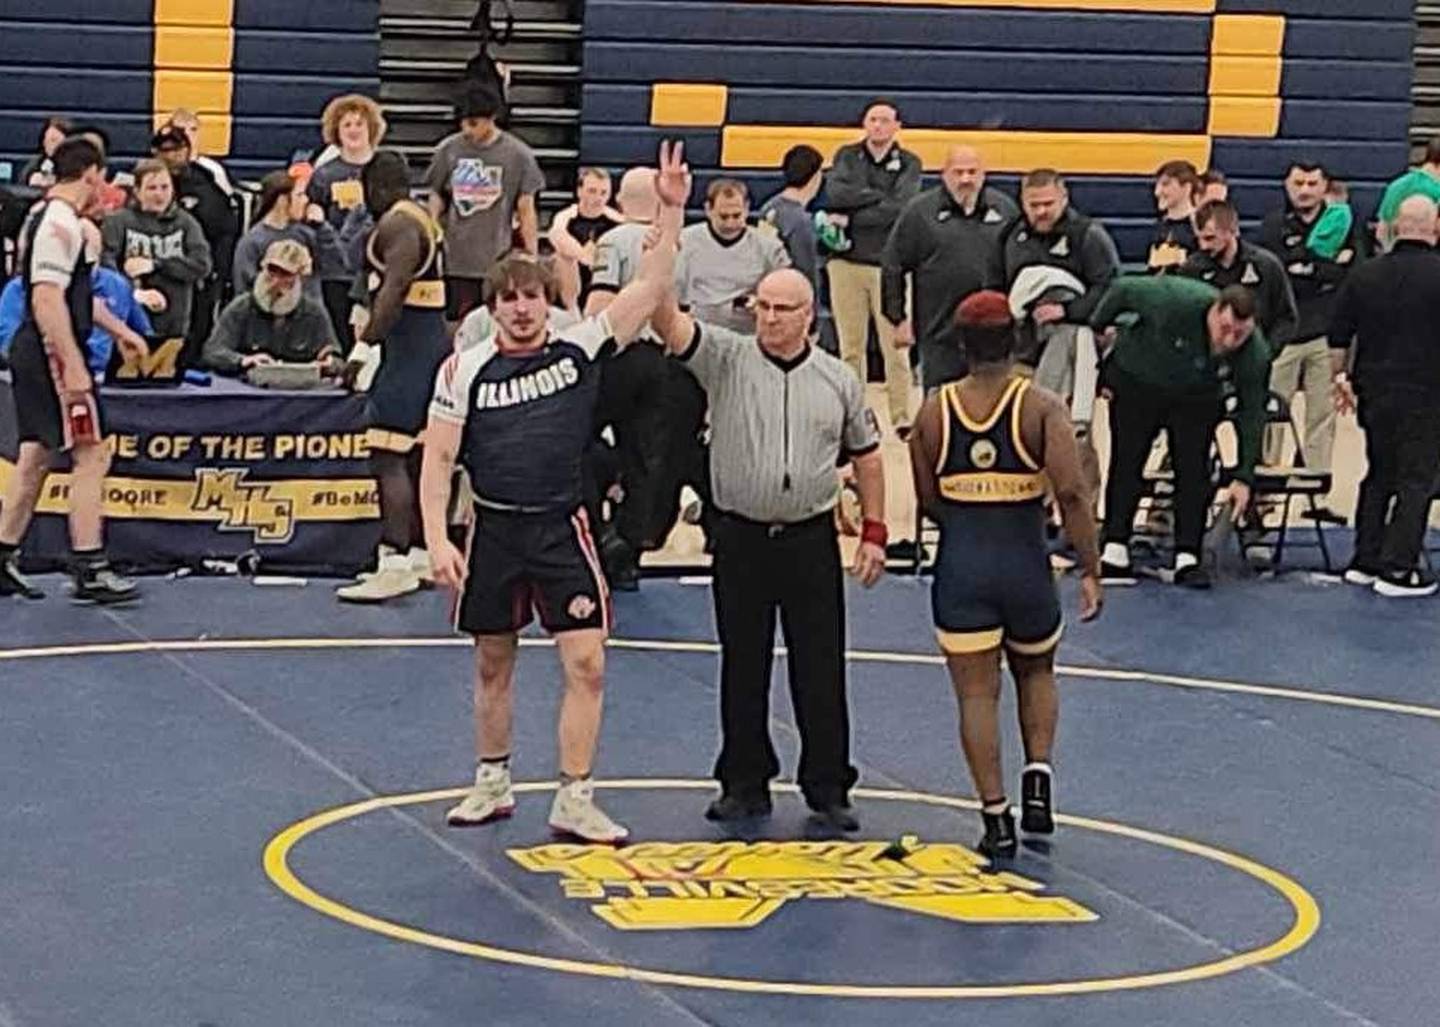 Seneca senior and Team Illinois’ Chris Peura earned a late 215-pound pinfall at the Illinois vs. Indiana All-Star Classic at Mooresville, Indiana sponsored by the Illinois Wrestling Coaches and Officials Association.